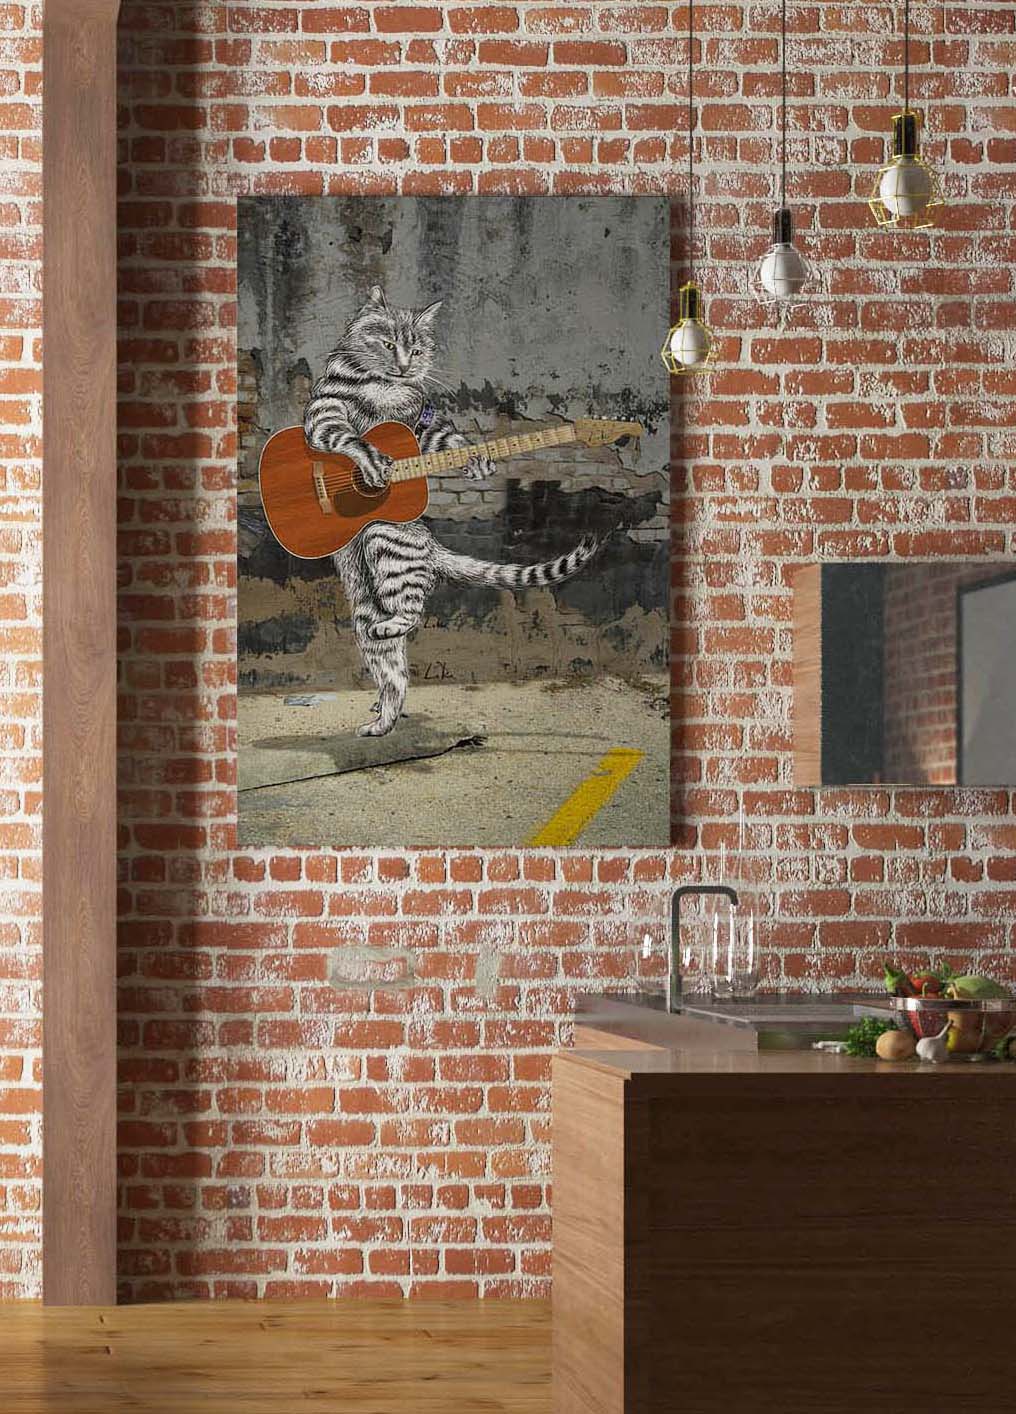 Large print on a brick wall of Busker the acoustic Cat Guitar playing in the parking lot next to a speak easy by Doug LaRue